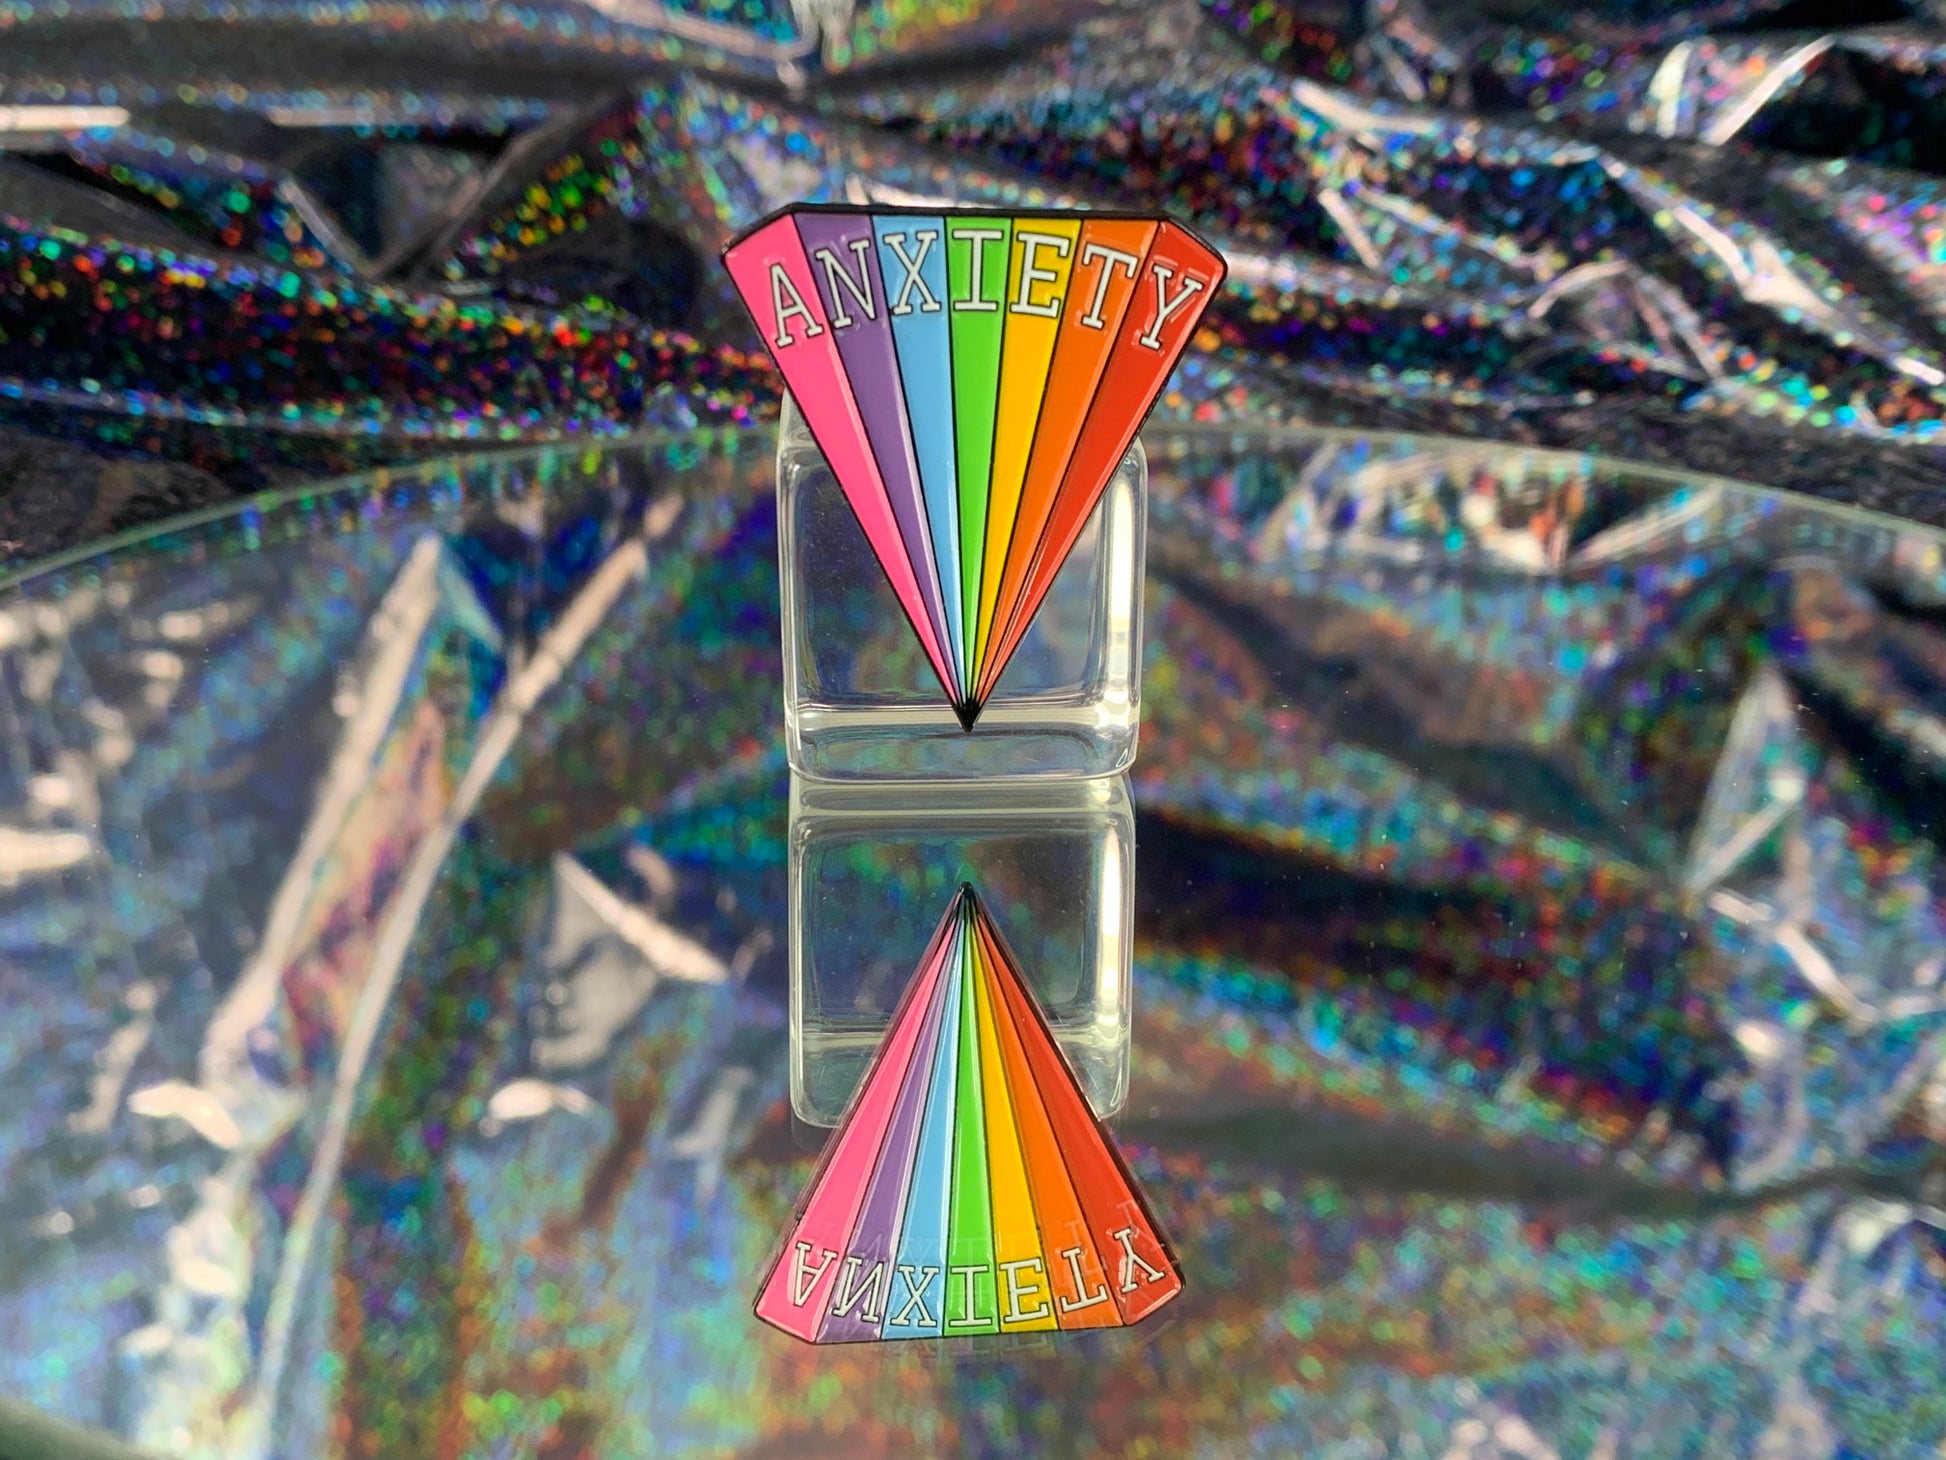 Triangular rainbow enamel pin that reads the word ANXIETY in white text